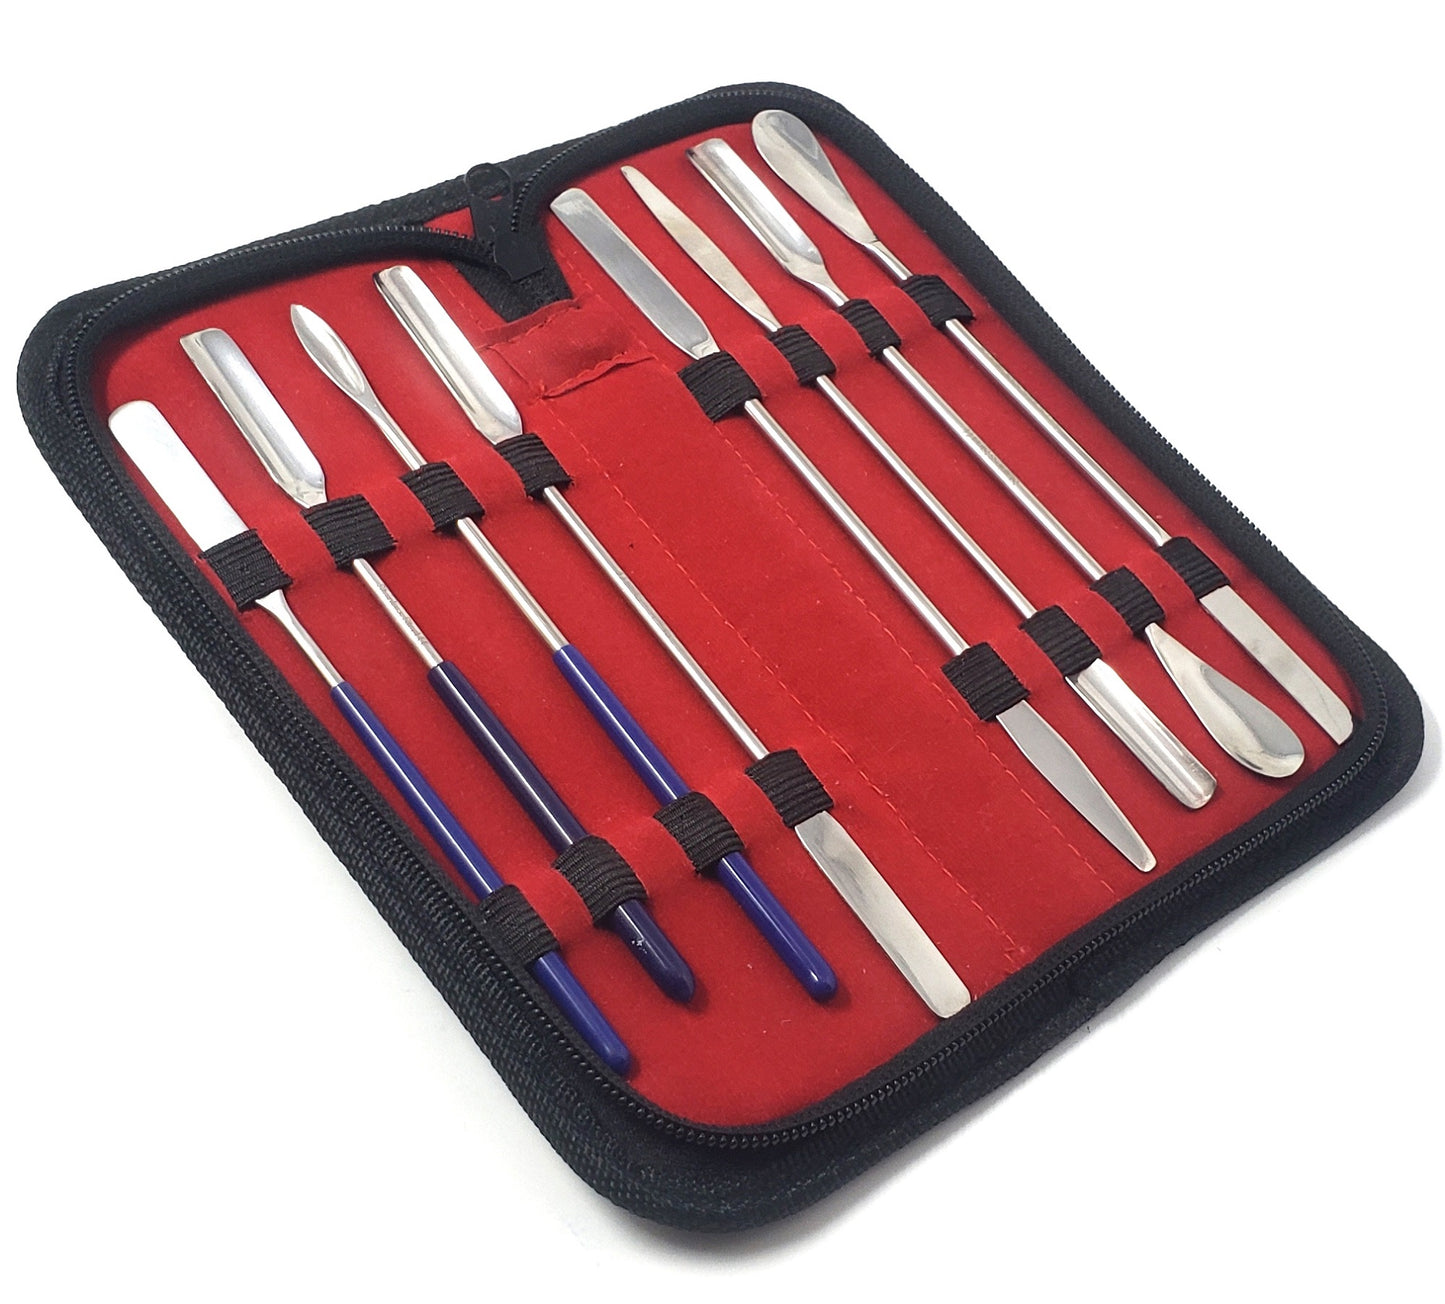 Stainless Steel Lab Spatula Set in a Carrying Case - 8 Pcs Edition